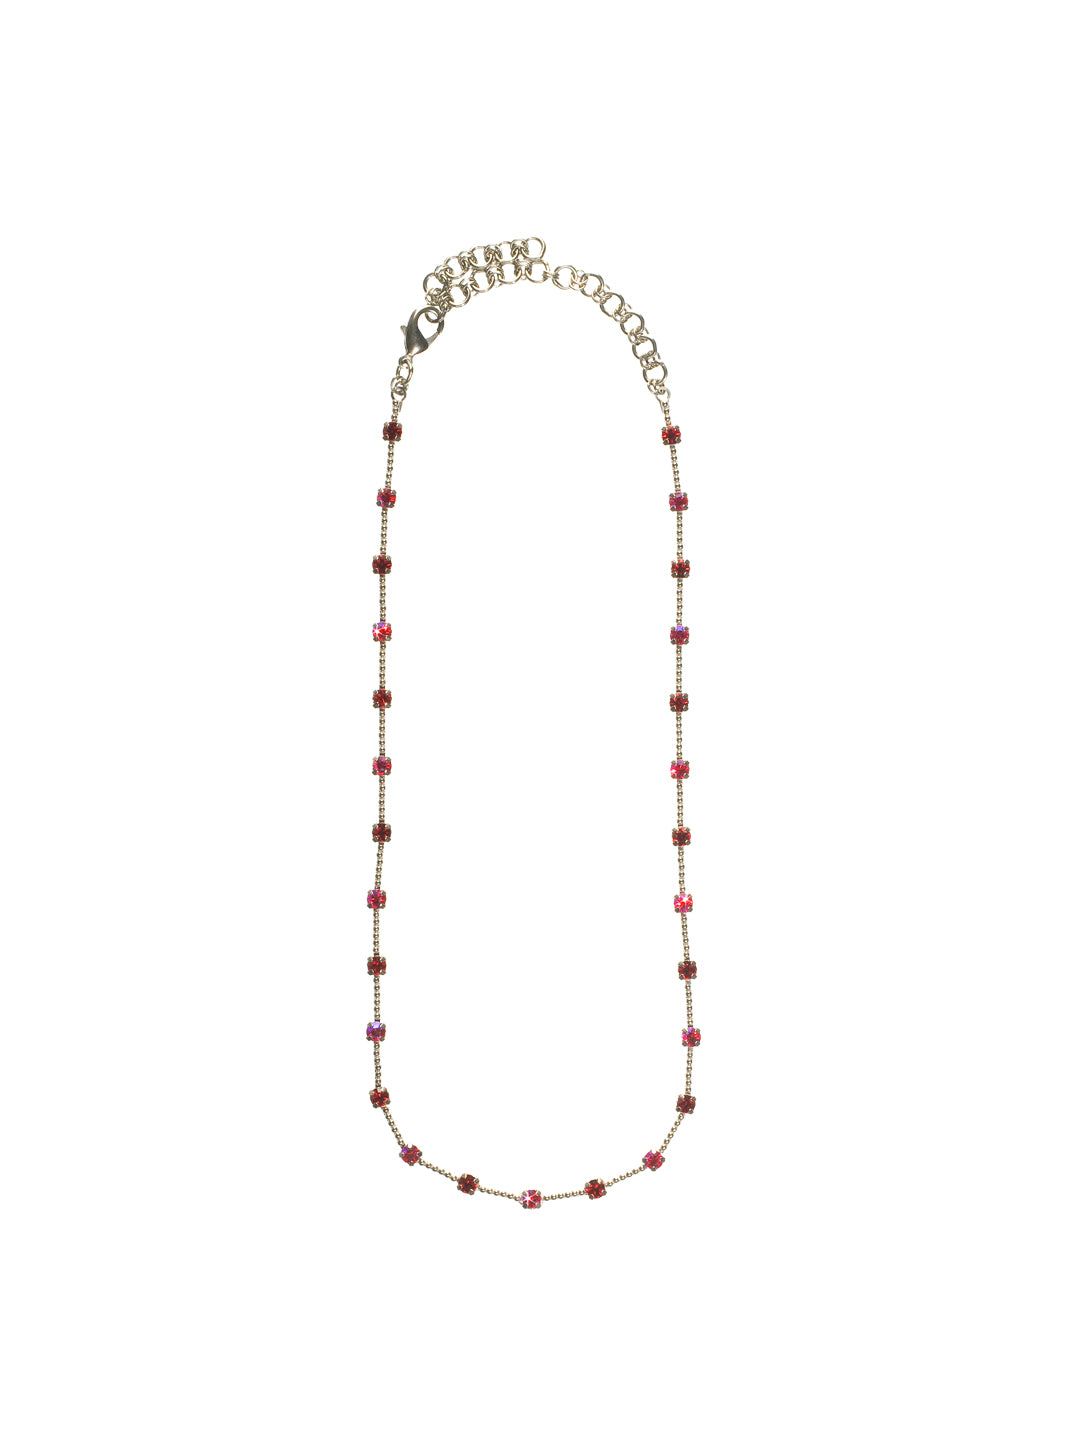 Classic Necklace with Alternating Crystals and Ball Chain Detail - NBZ28ASCB - classic necklace From Sorrelli's Cranberry collection in our Antique Silver-tone finish.